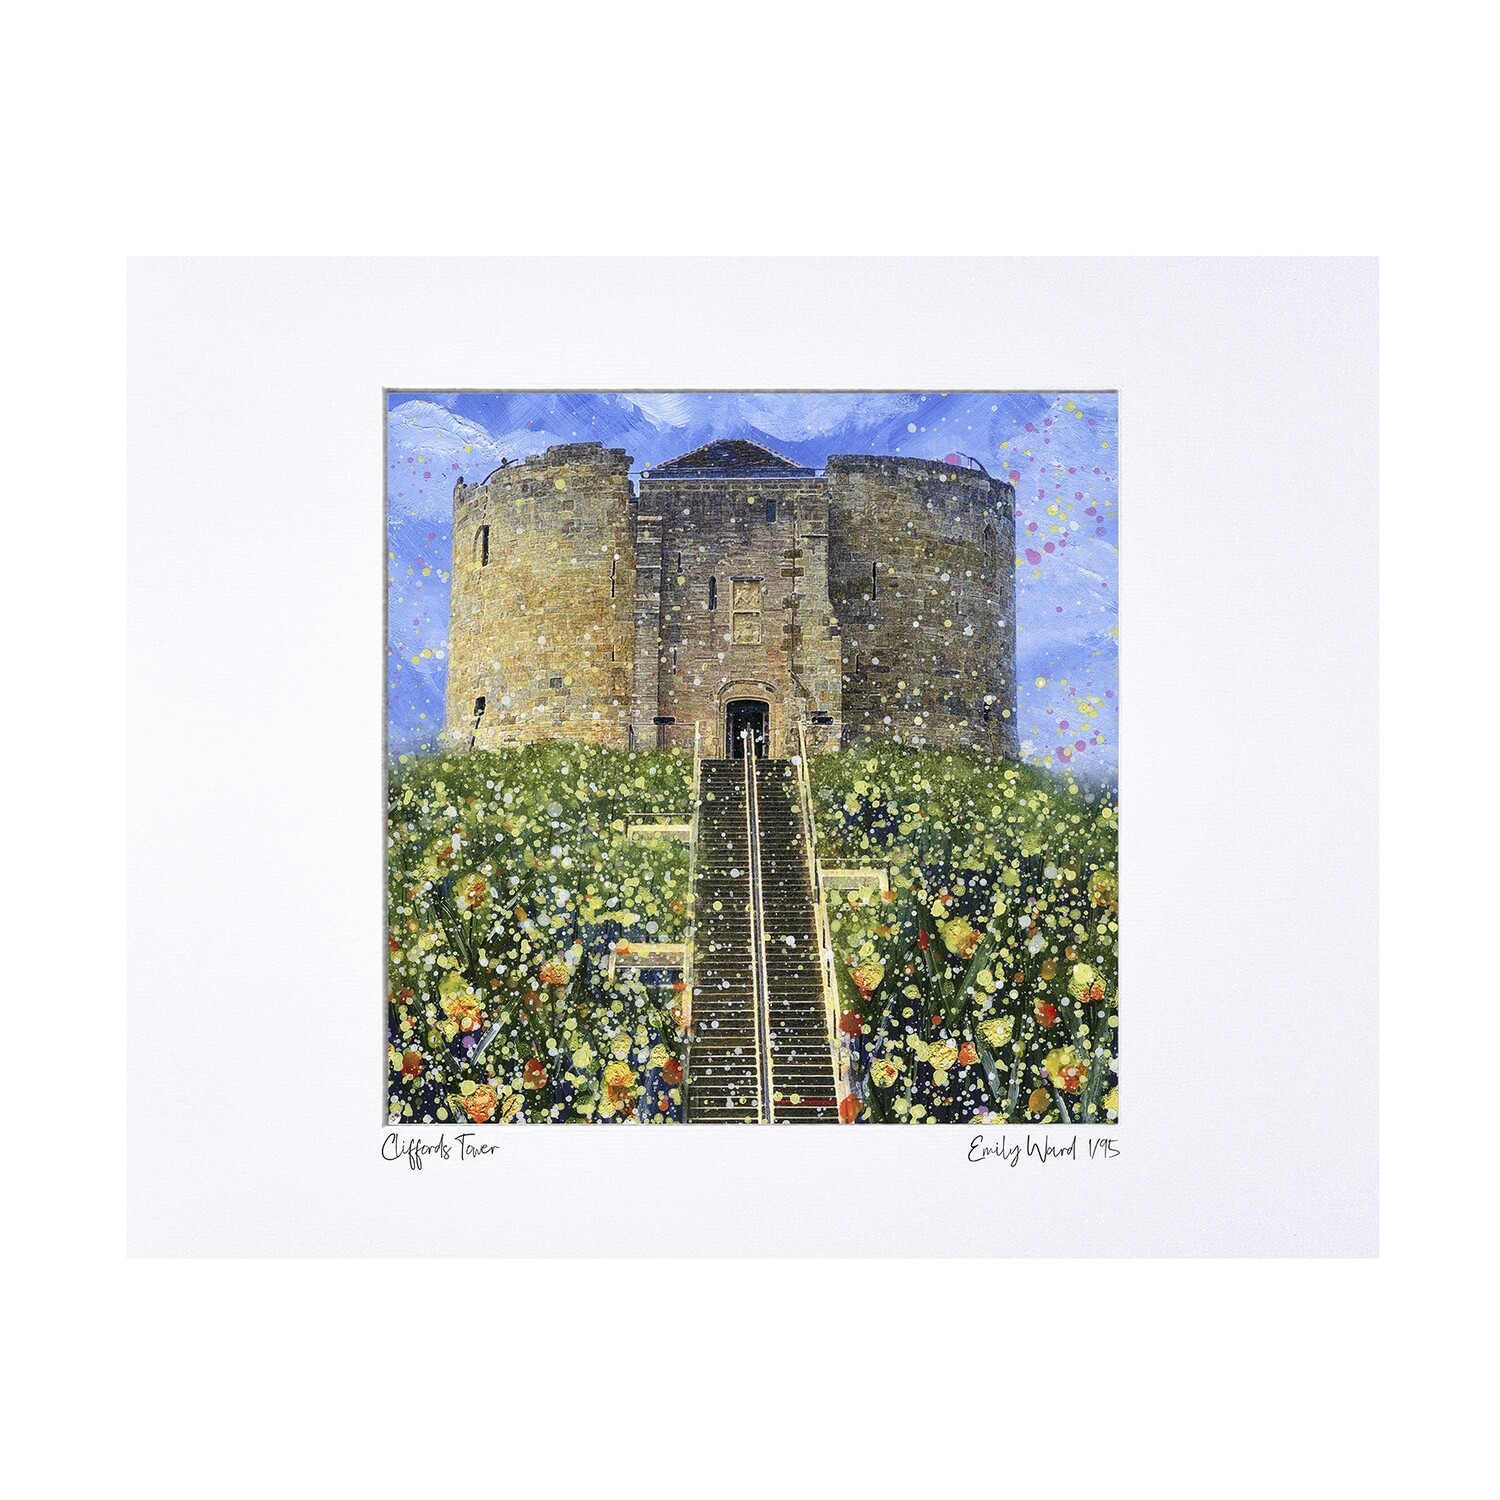 Clifford's Tower - Limited Edition Print